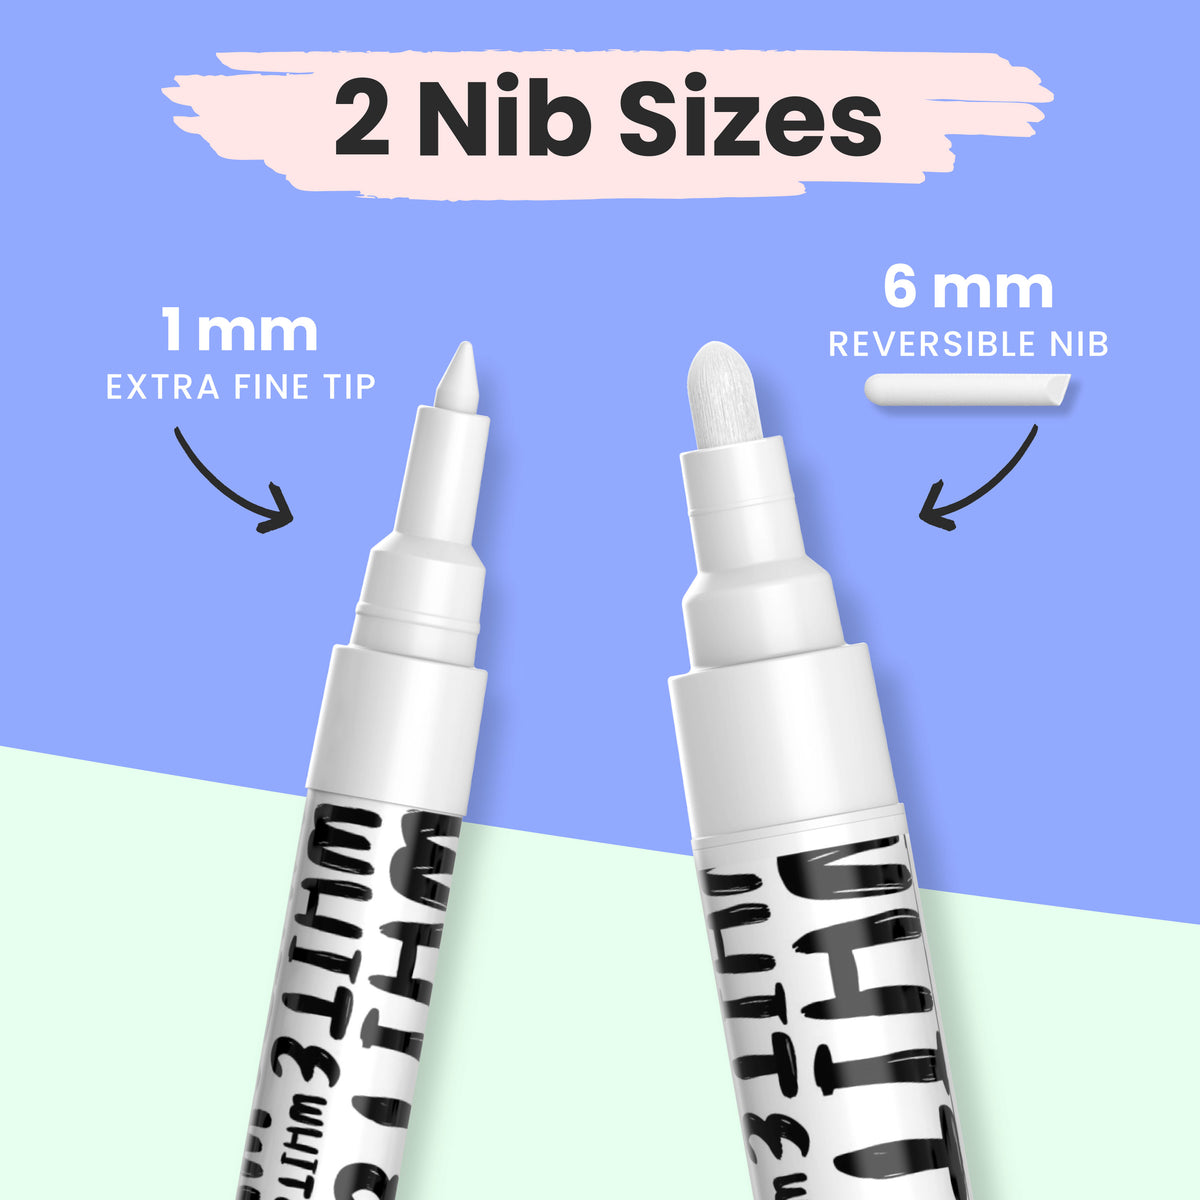 Chalkola Acrylic White Paint Pens (6 Pack) Extra Fine Point (1mm) & Medium Tip (3mm) - Permanent White Marker Ink for Rock Painting, Fabric, Tire, Met